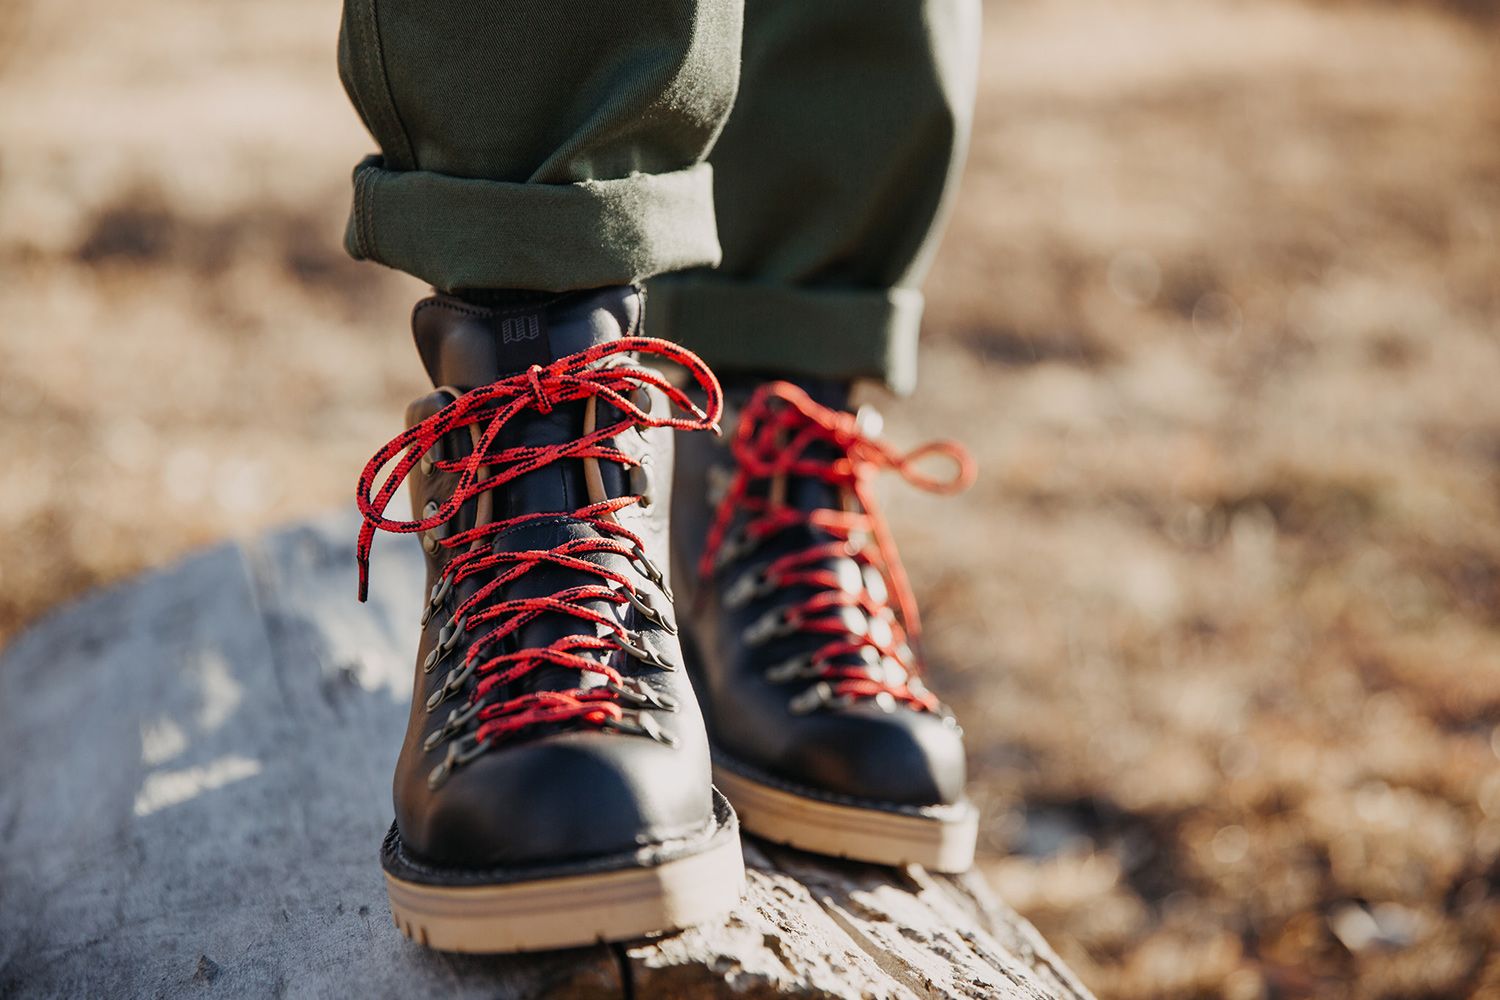 Danner x Topo Designs Collaboration Boot - Most Iconic Hiking Boot